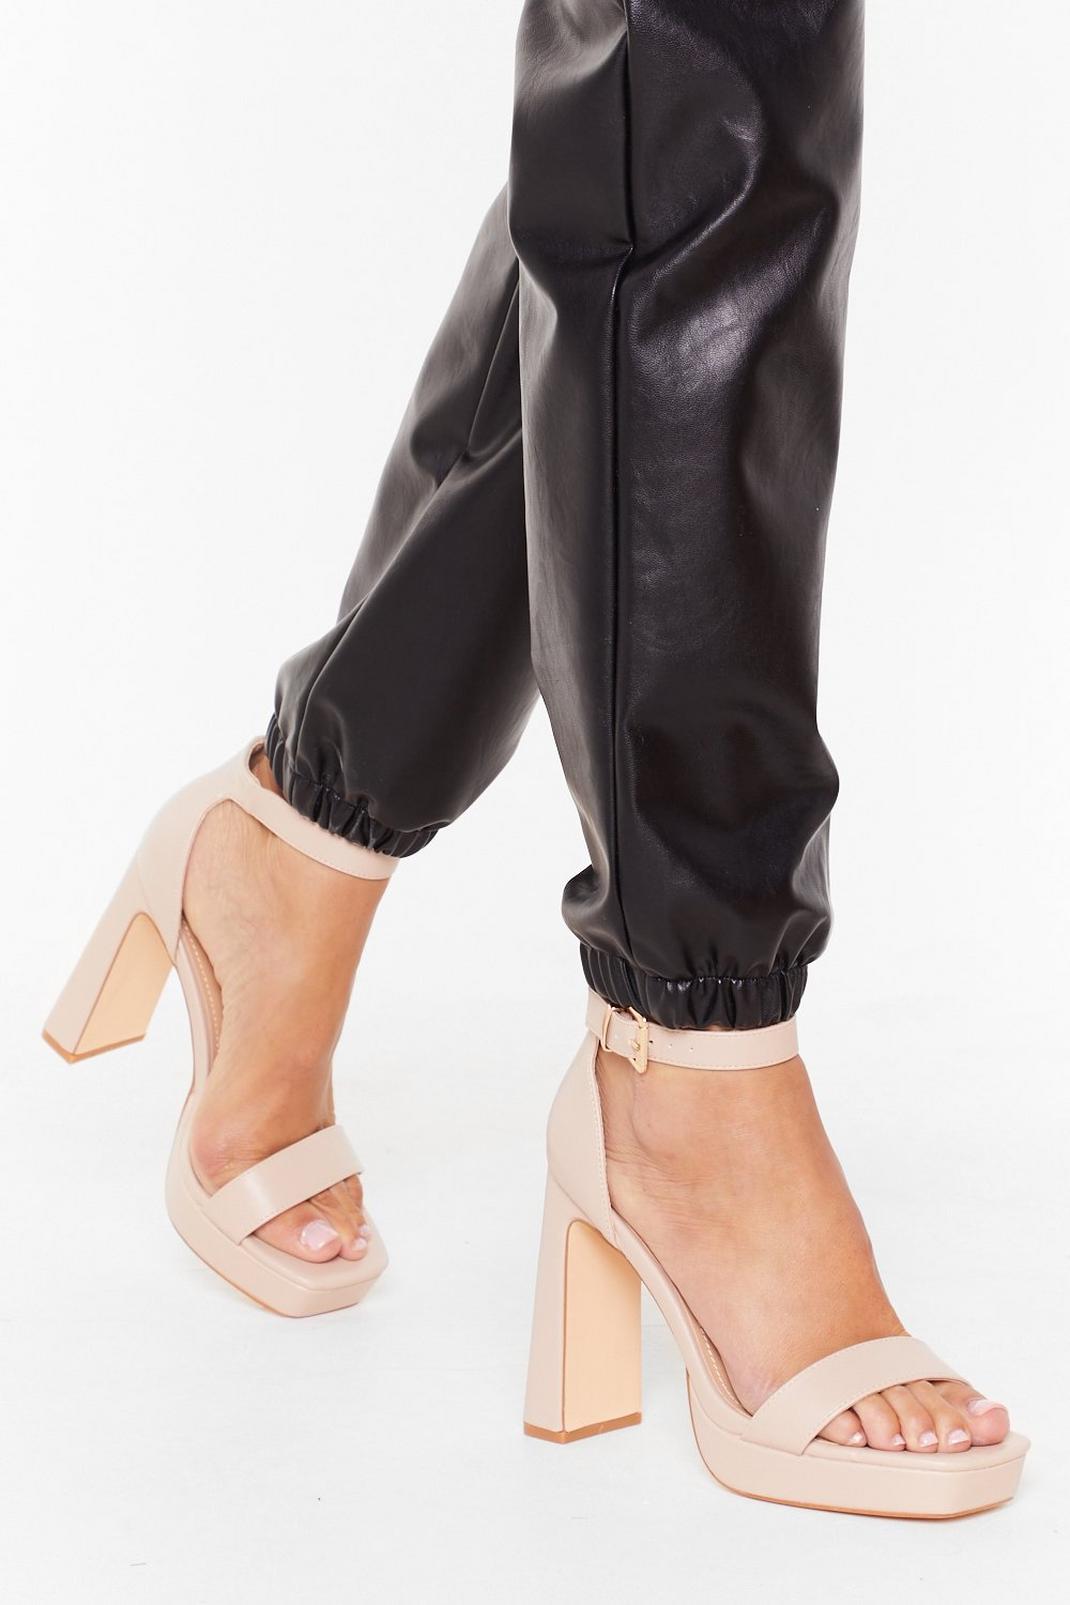 We Don't Flare Anymore Faux Leather Platform Heels image number 1